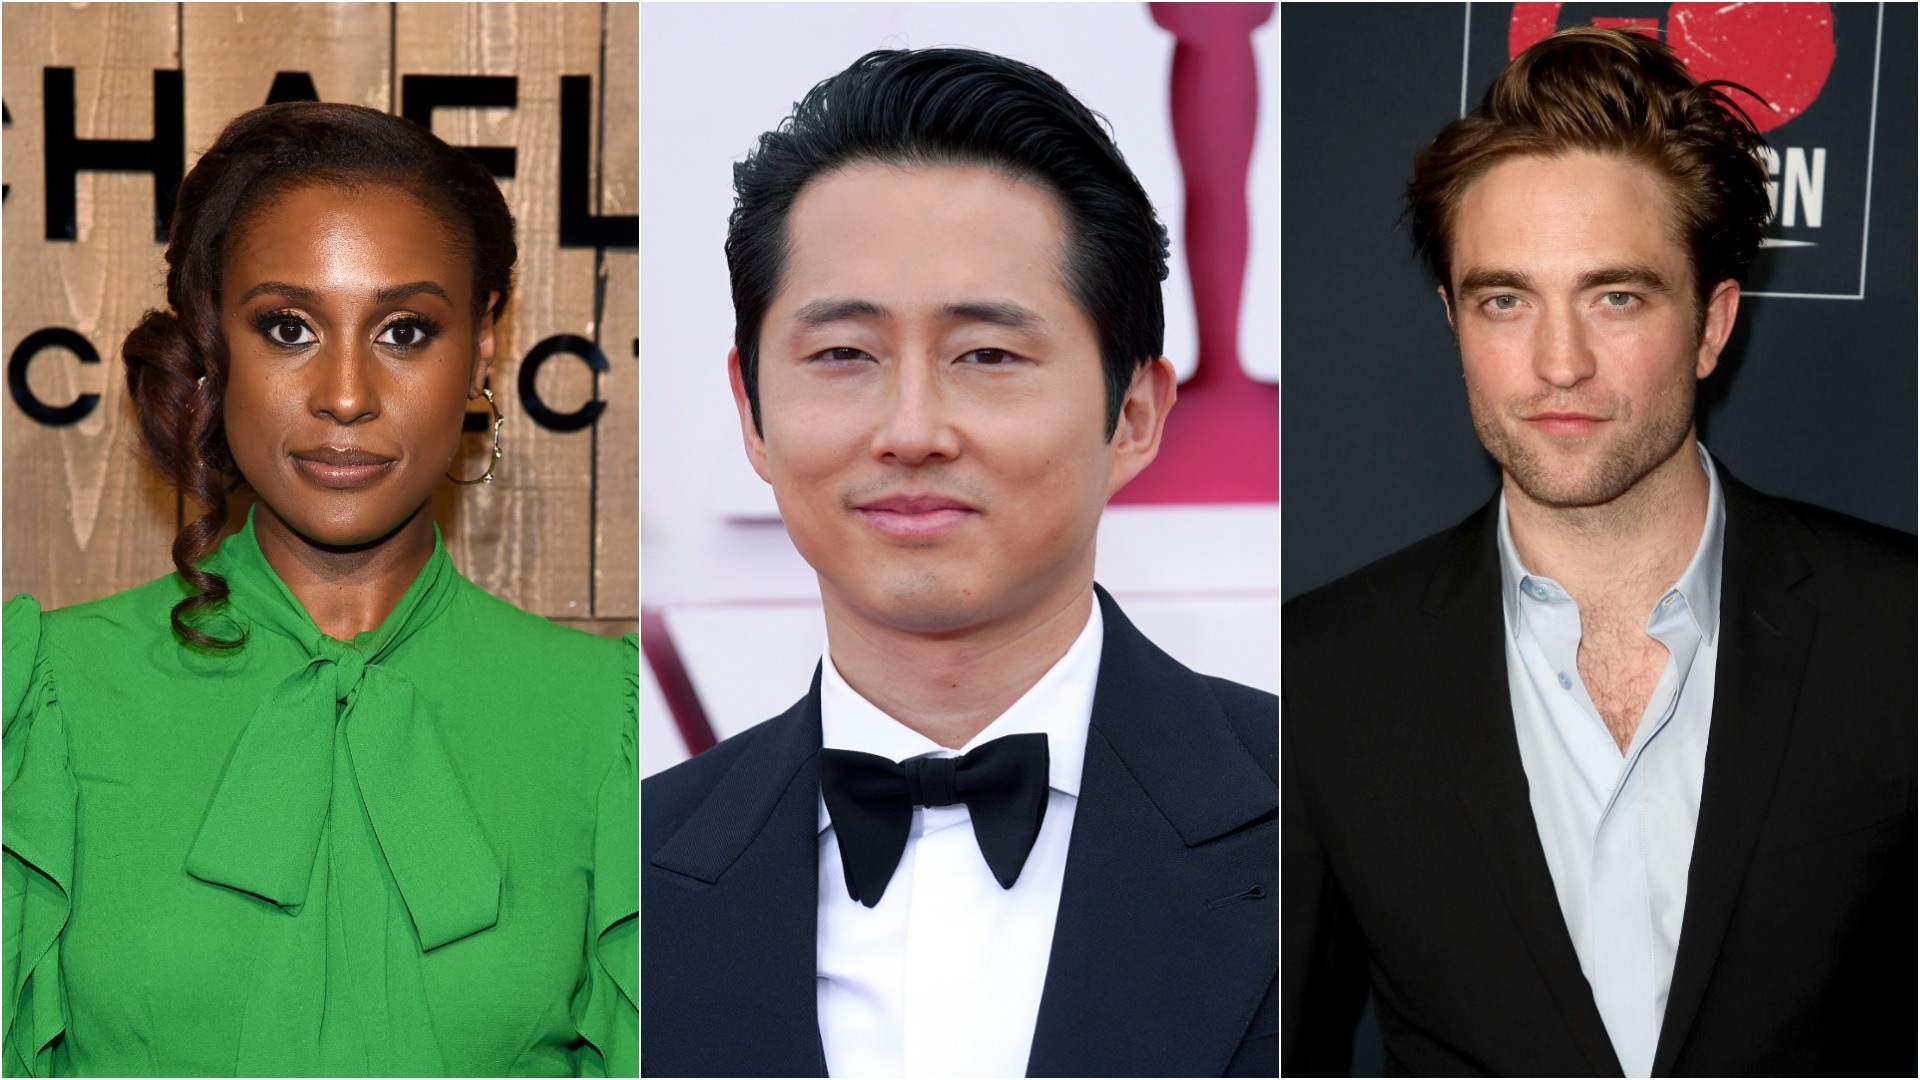 The Academy sends invites to 395 new members, including Robert Pattinson, Issa Rae, and Steven Yeun